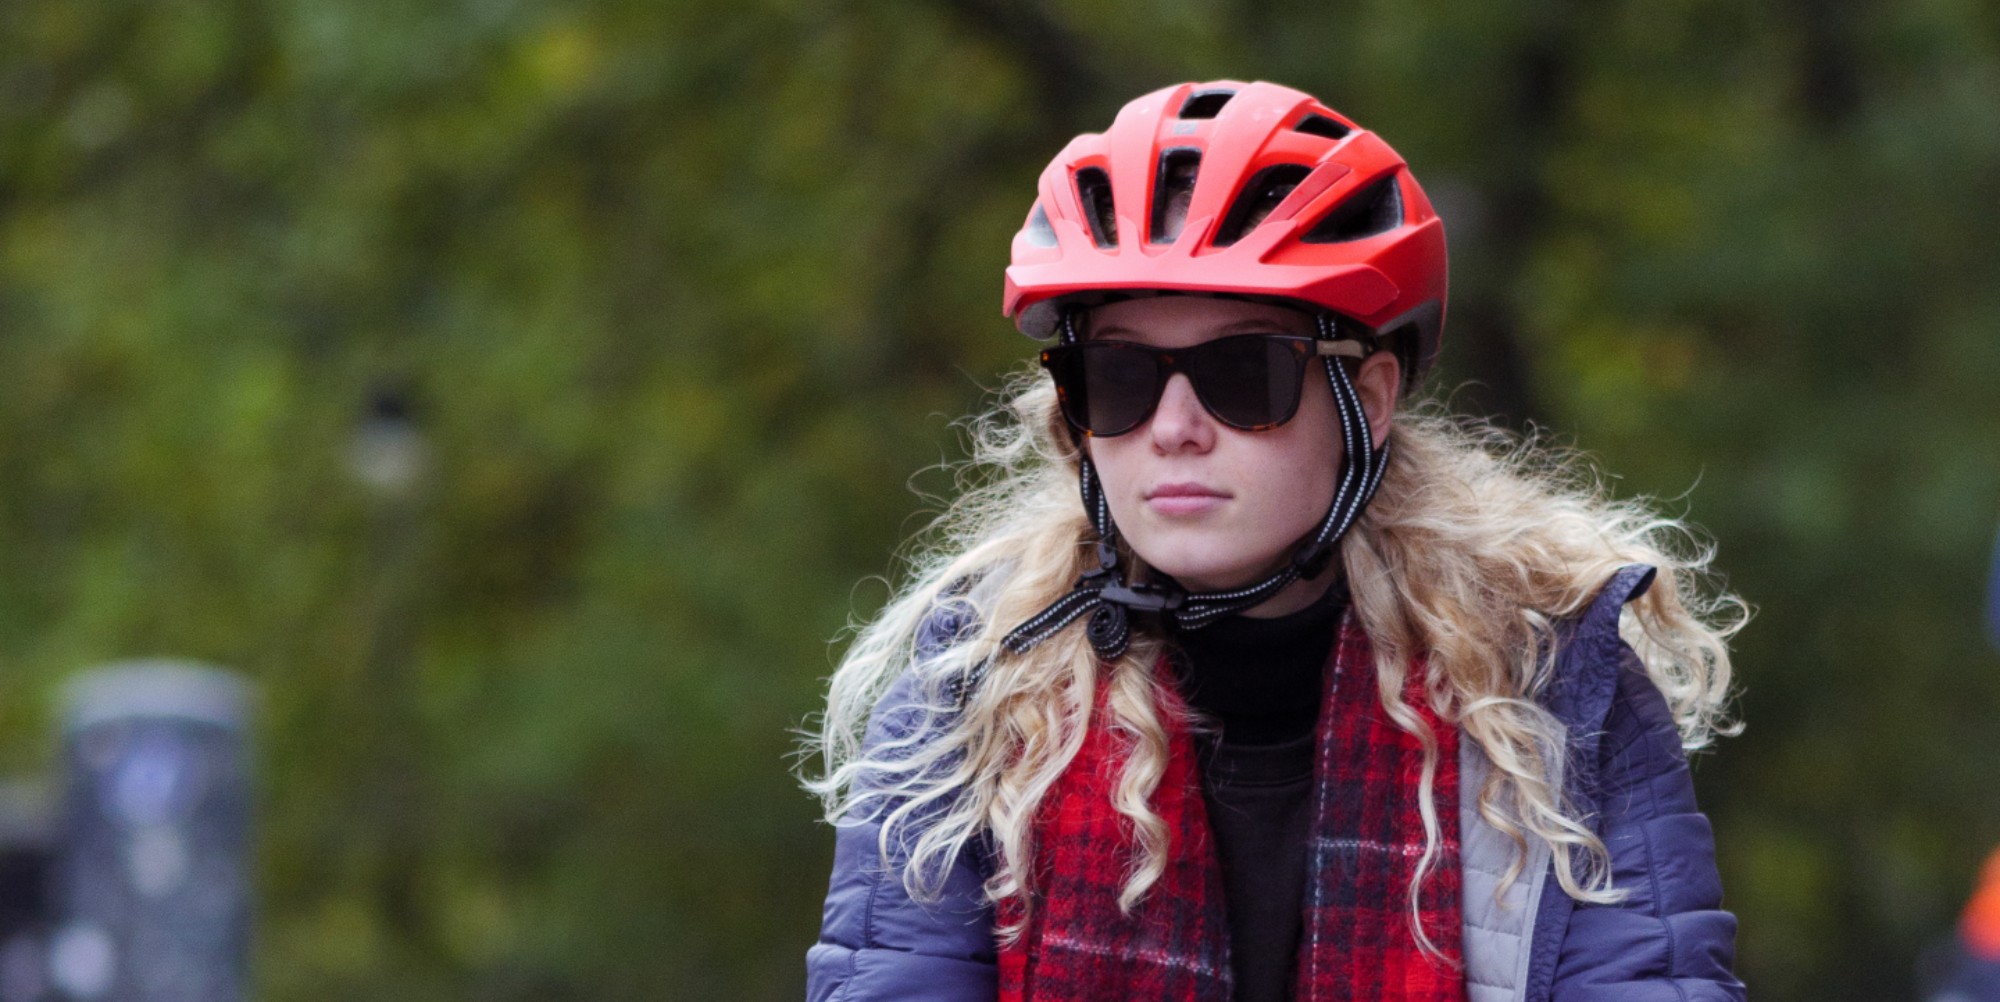 CapoVelo.com - HindSight Edge Rearview Cycling Glasses Launch